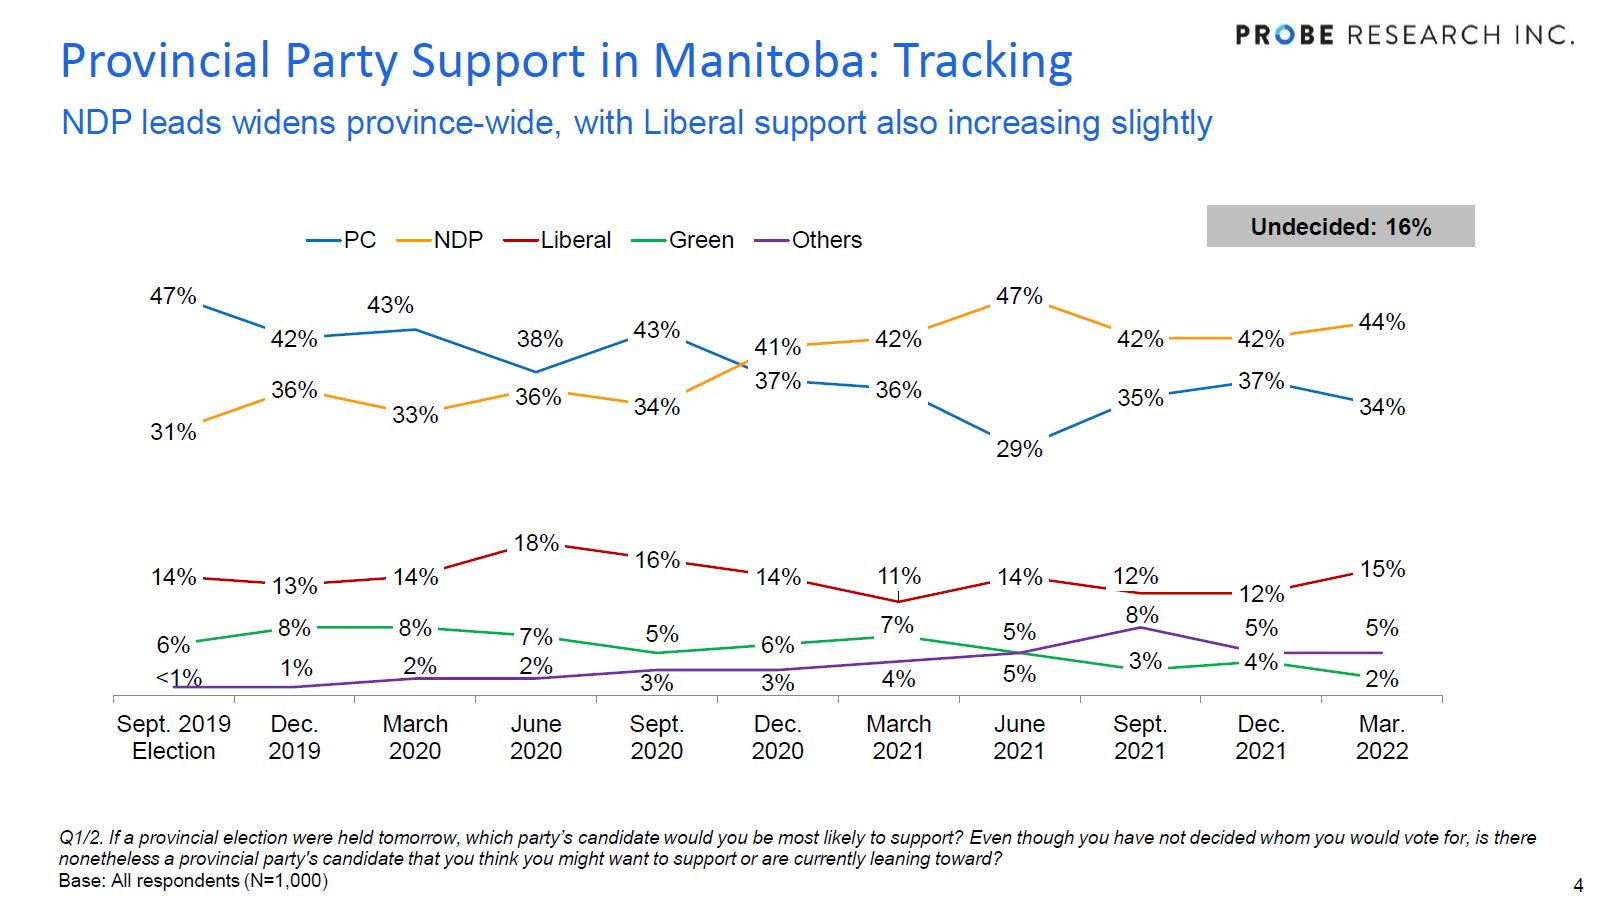 March 2022 provincial party support tracking